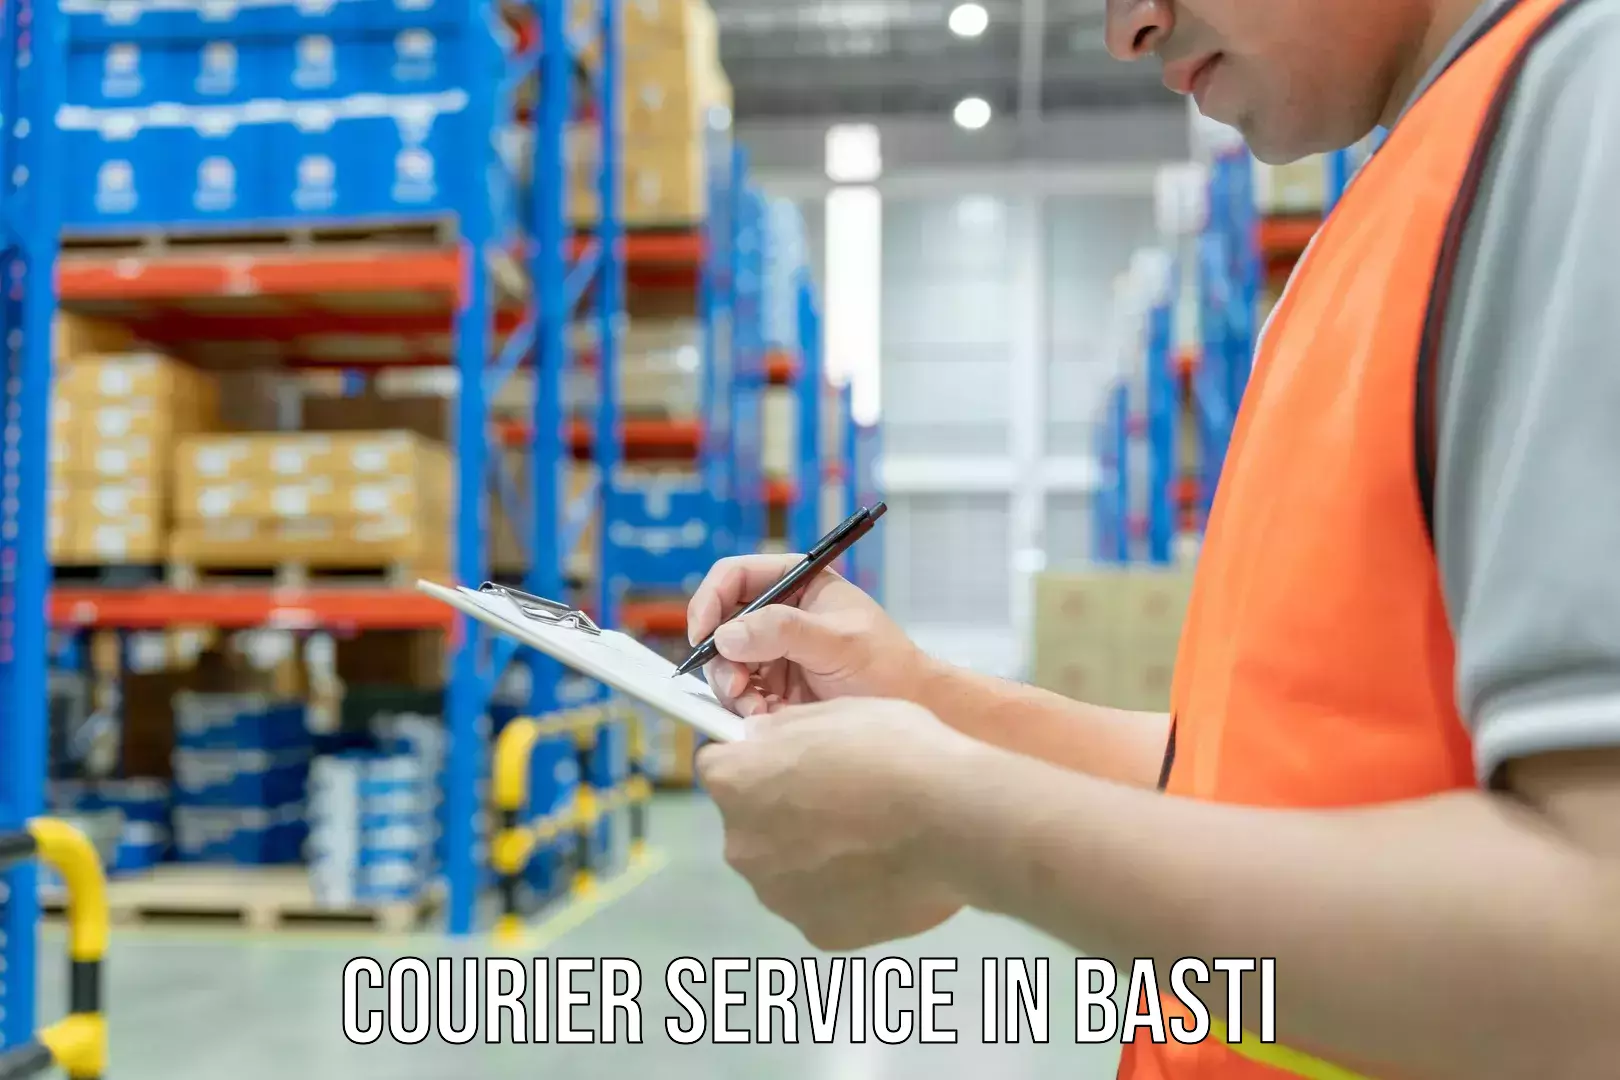 Personal courier services in Basti